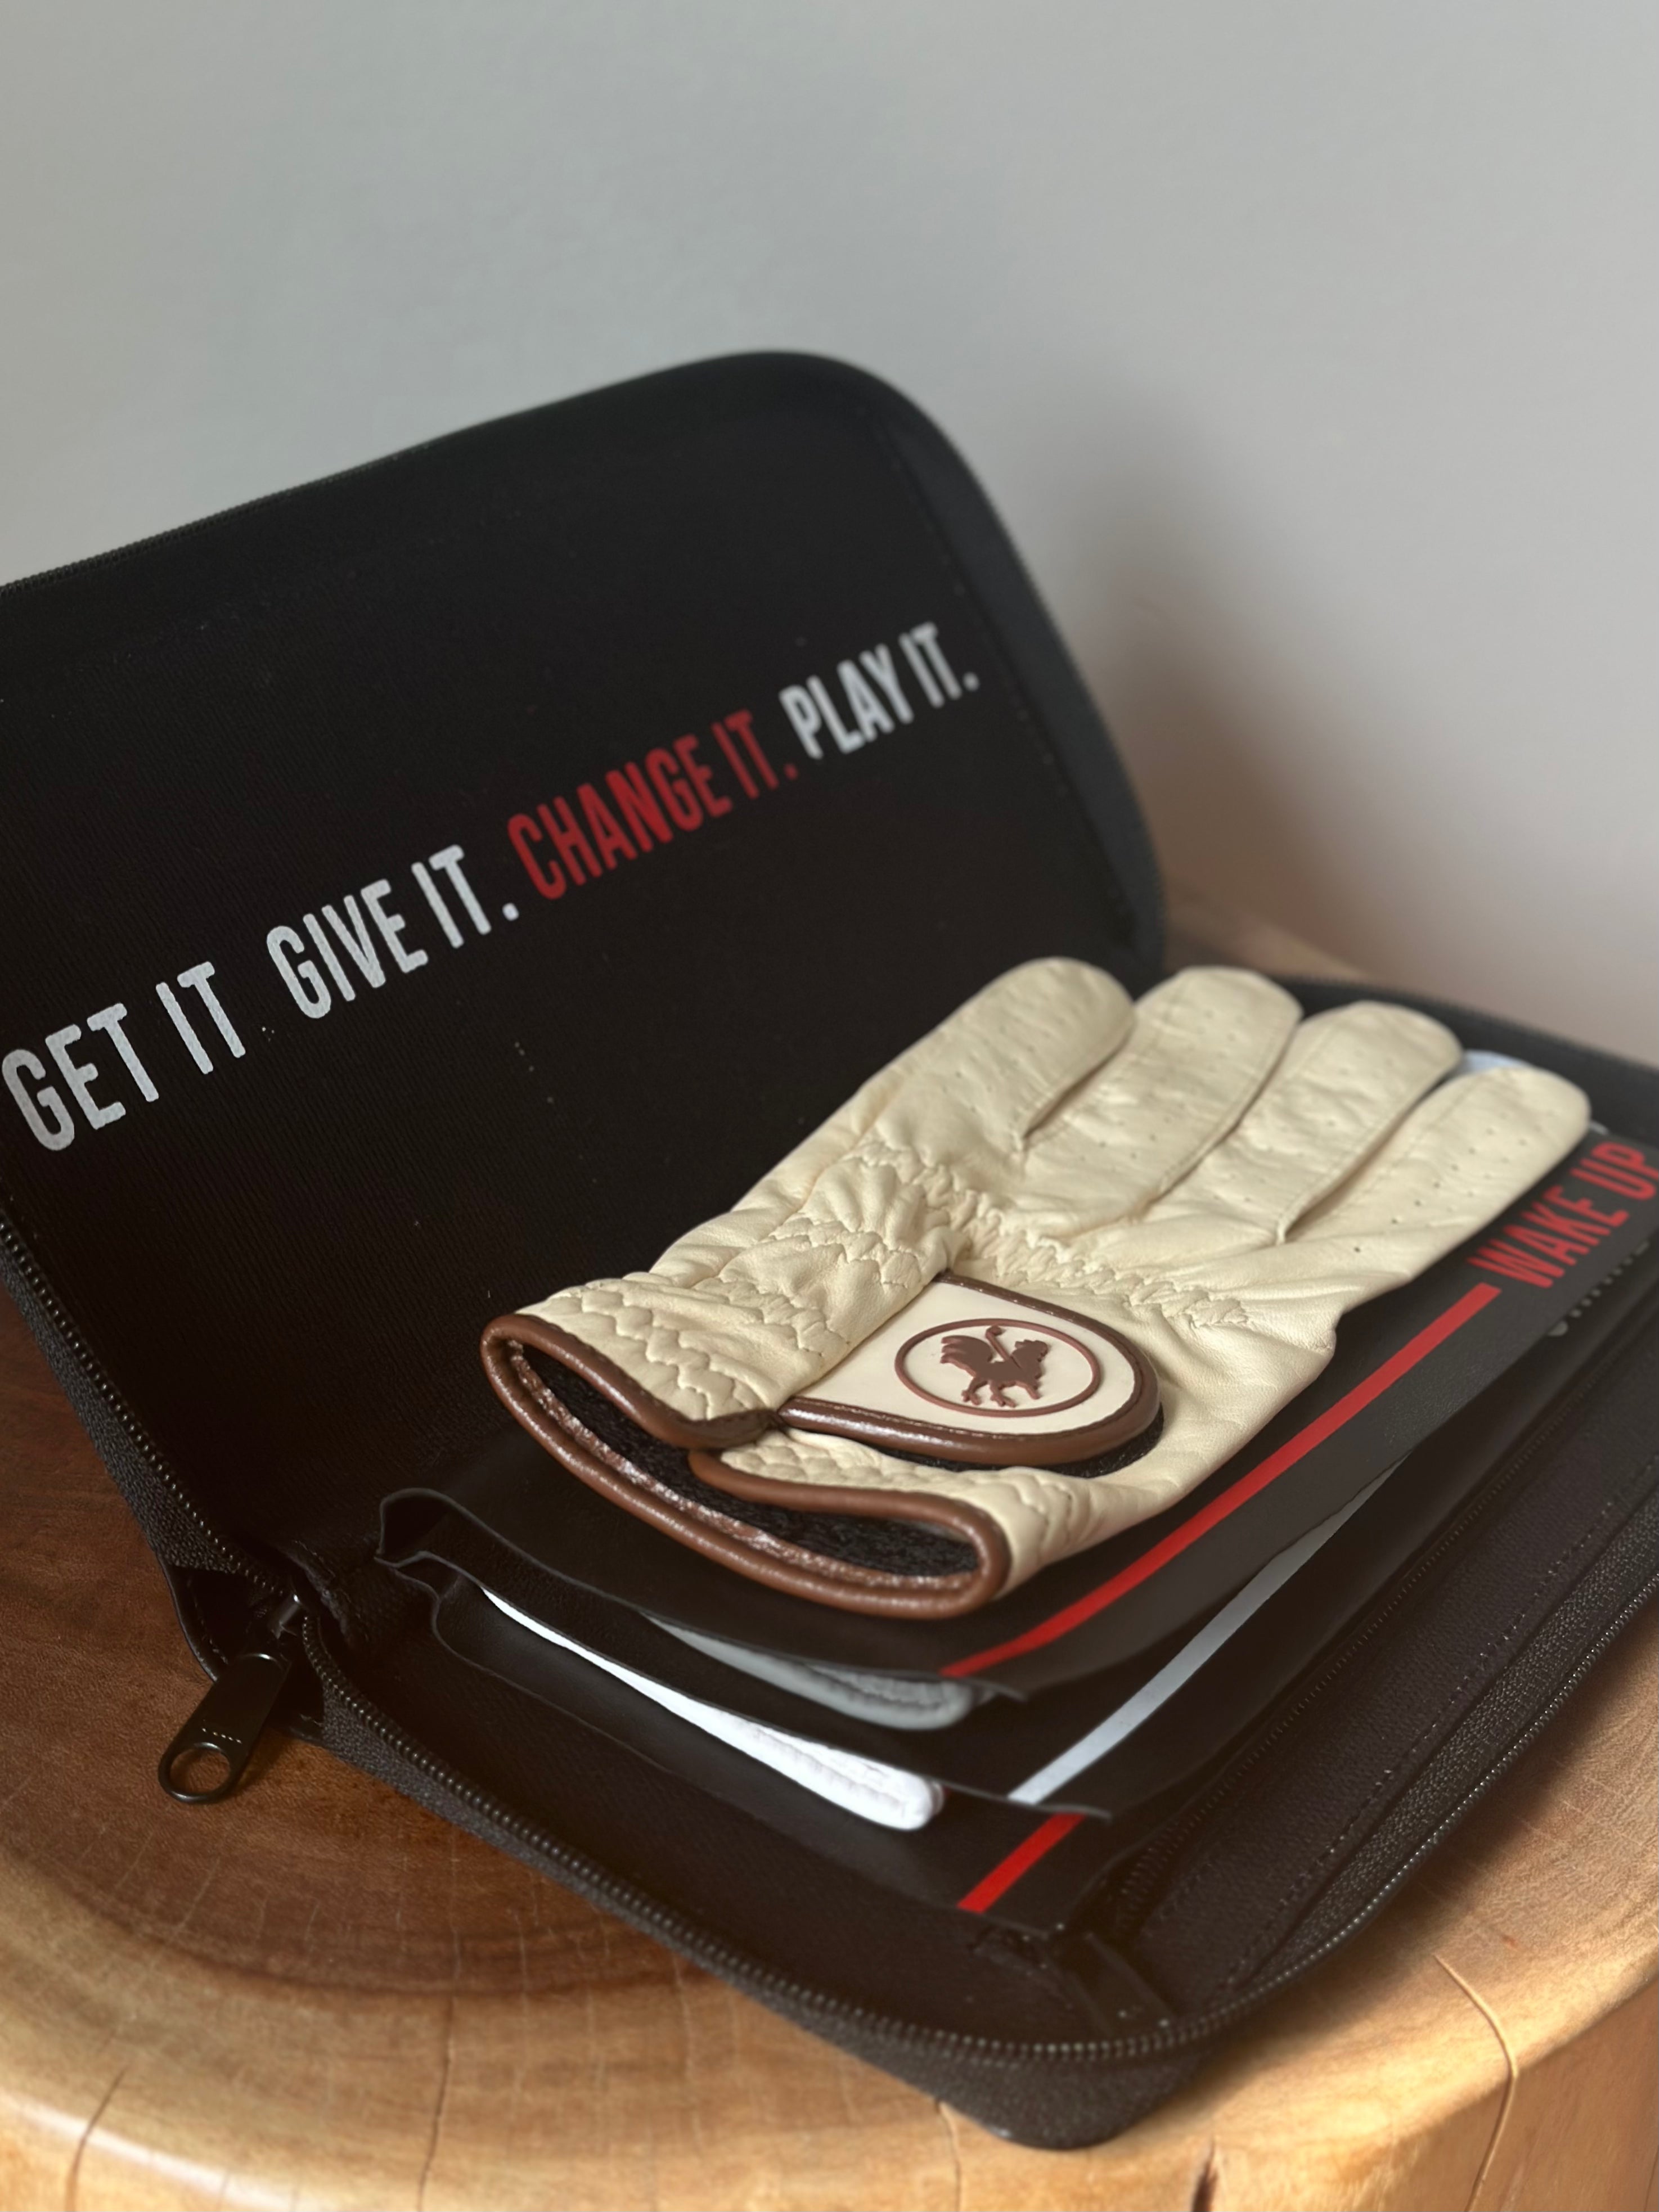 The Tawny golf glove in glove compartment